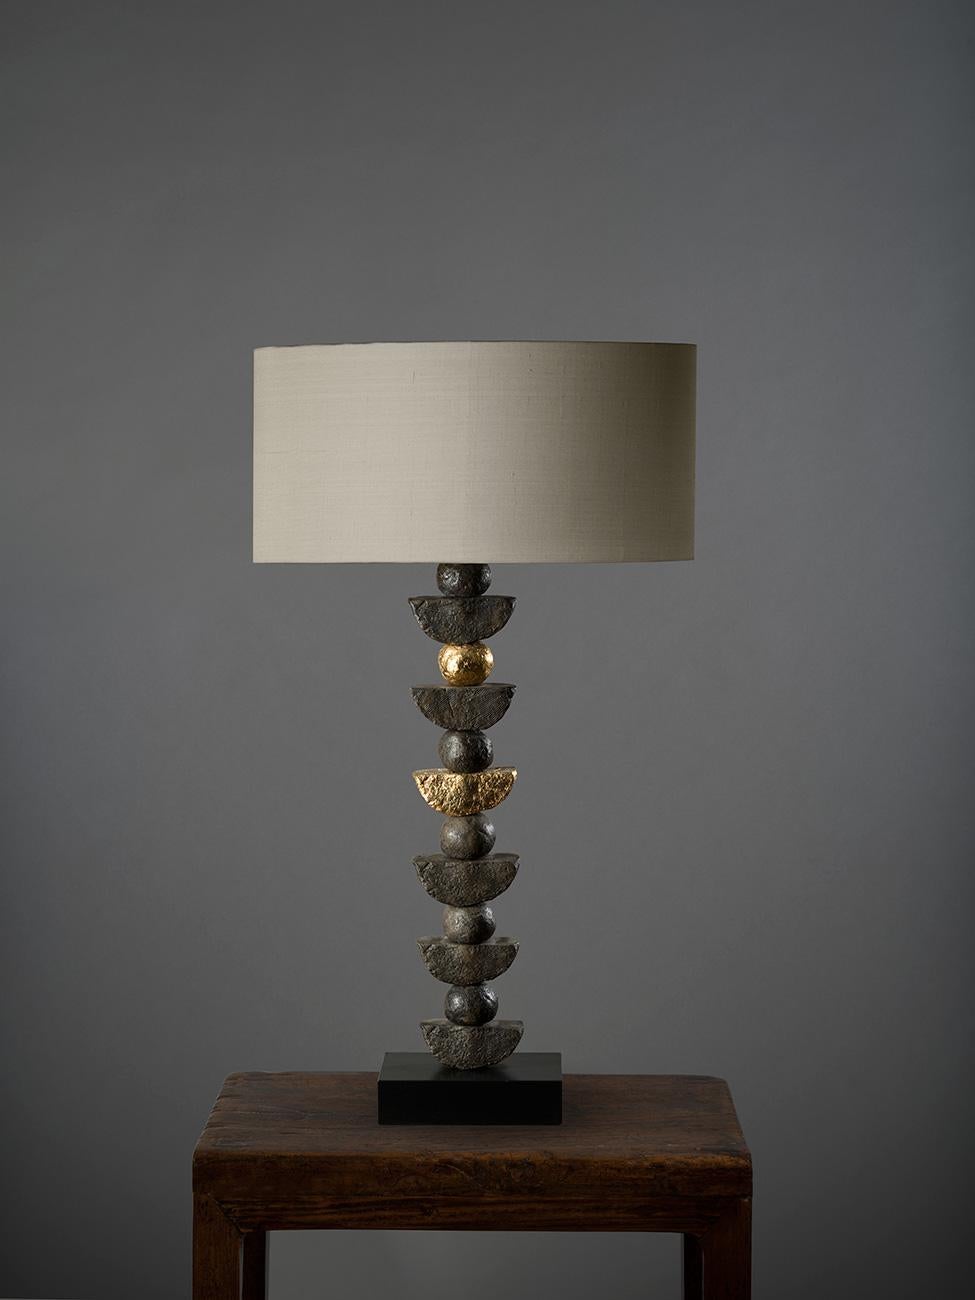 This contemporary Margit Wittig table lamp is mounted on a slate base and features multiple bronze resin handcrafted semi-circles. Each element is hand cast and patinated to increase tonal contrast and enhance the surface texture. The 24-karat gold